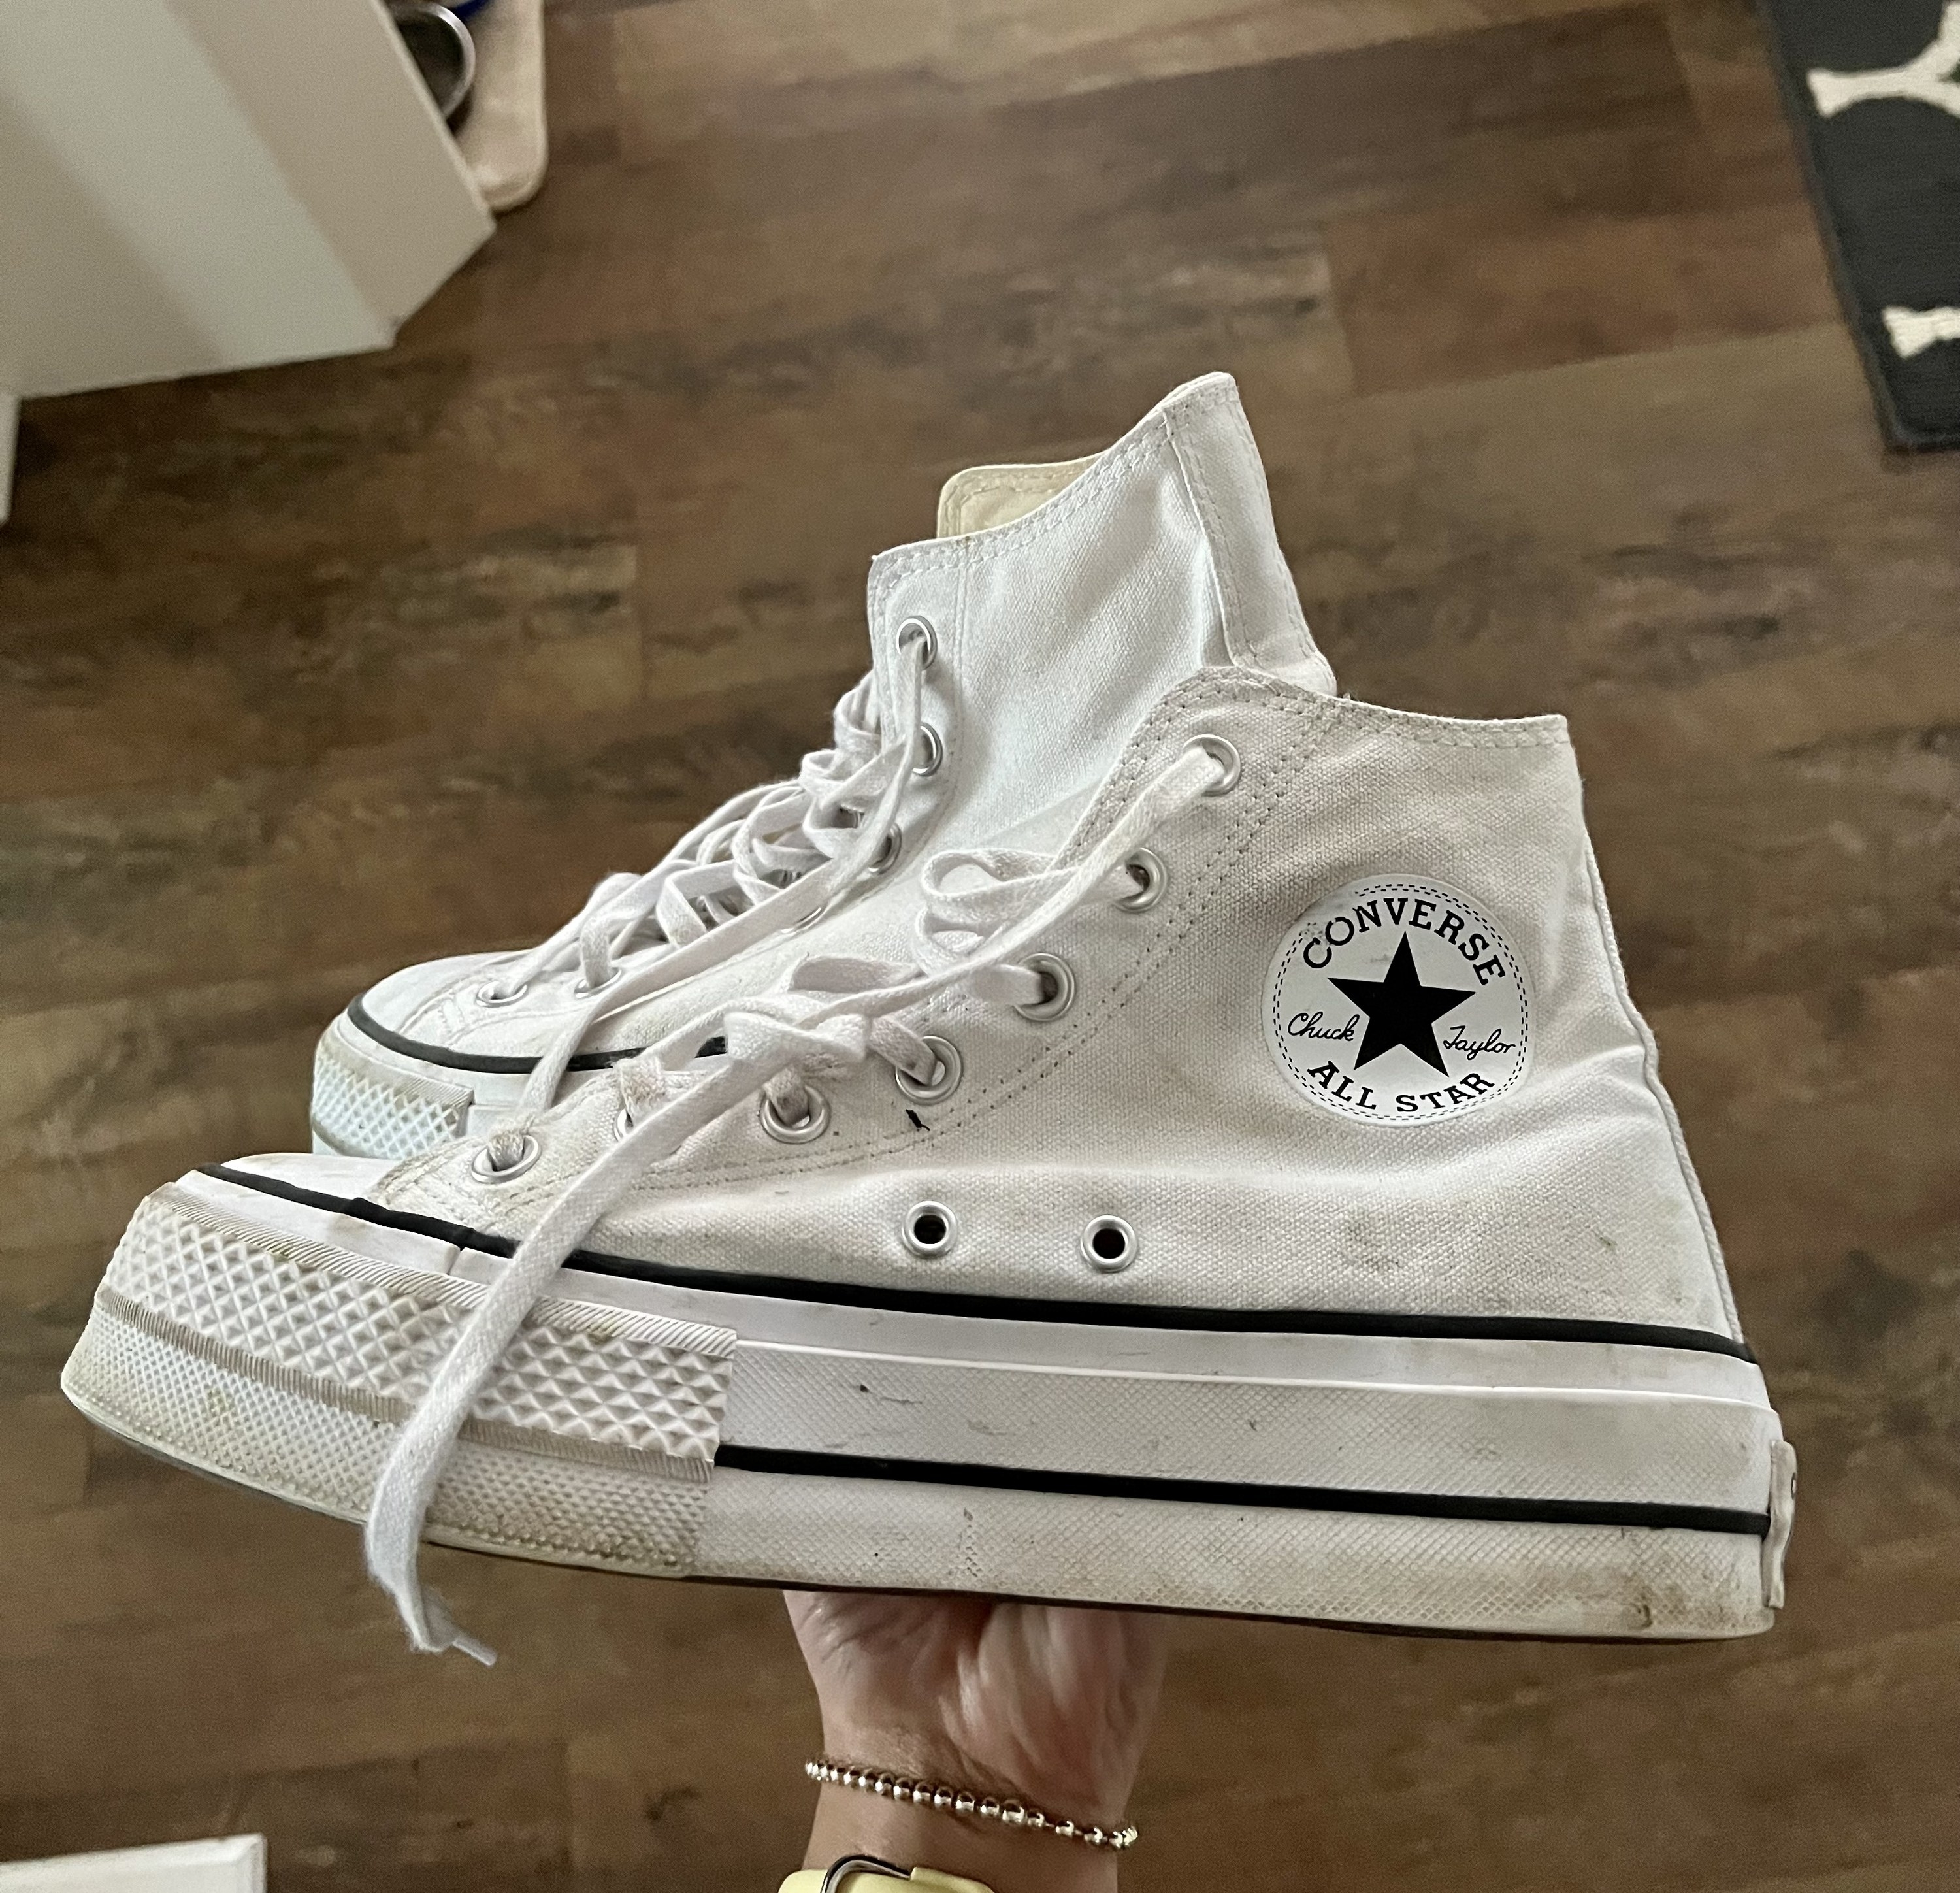 The pair of Converse in Melina&#x27;s hand